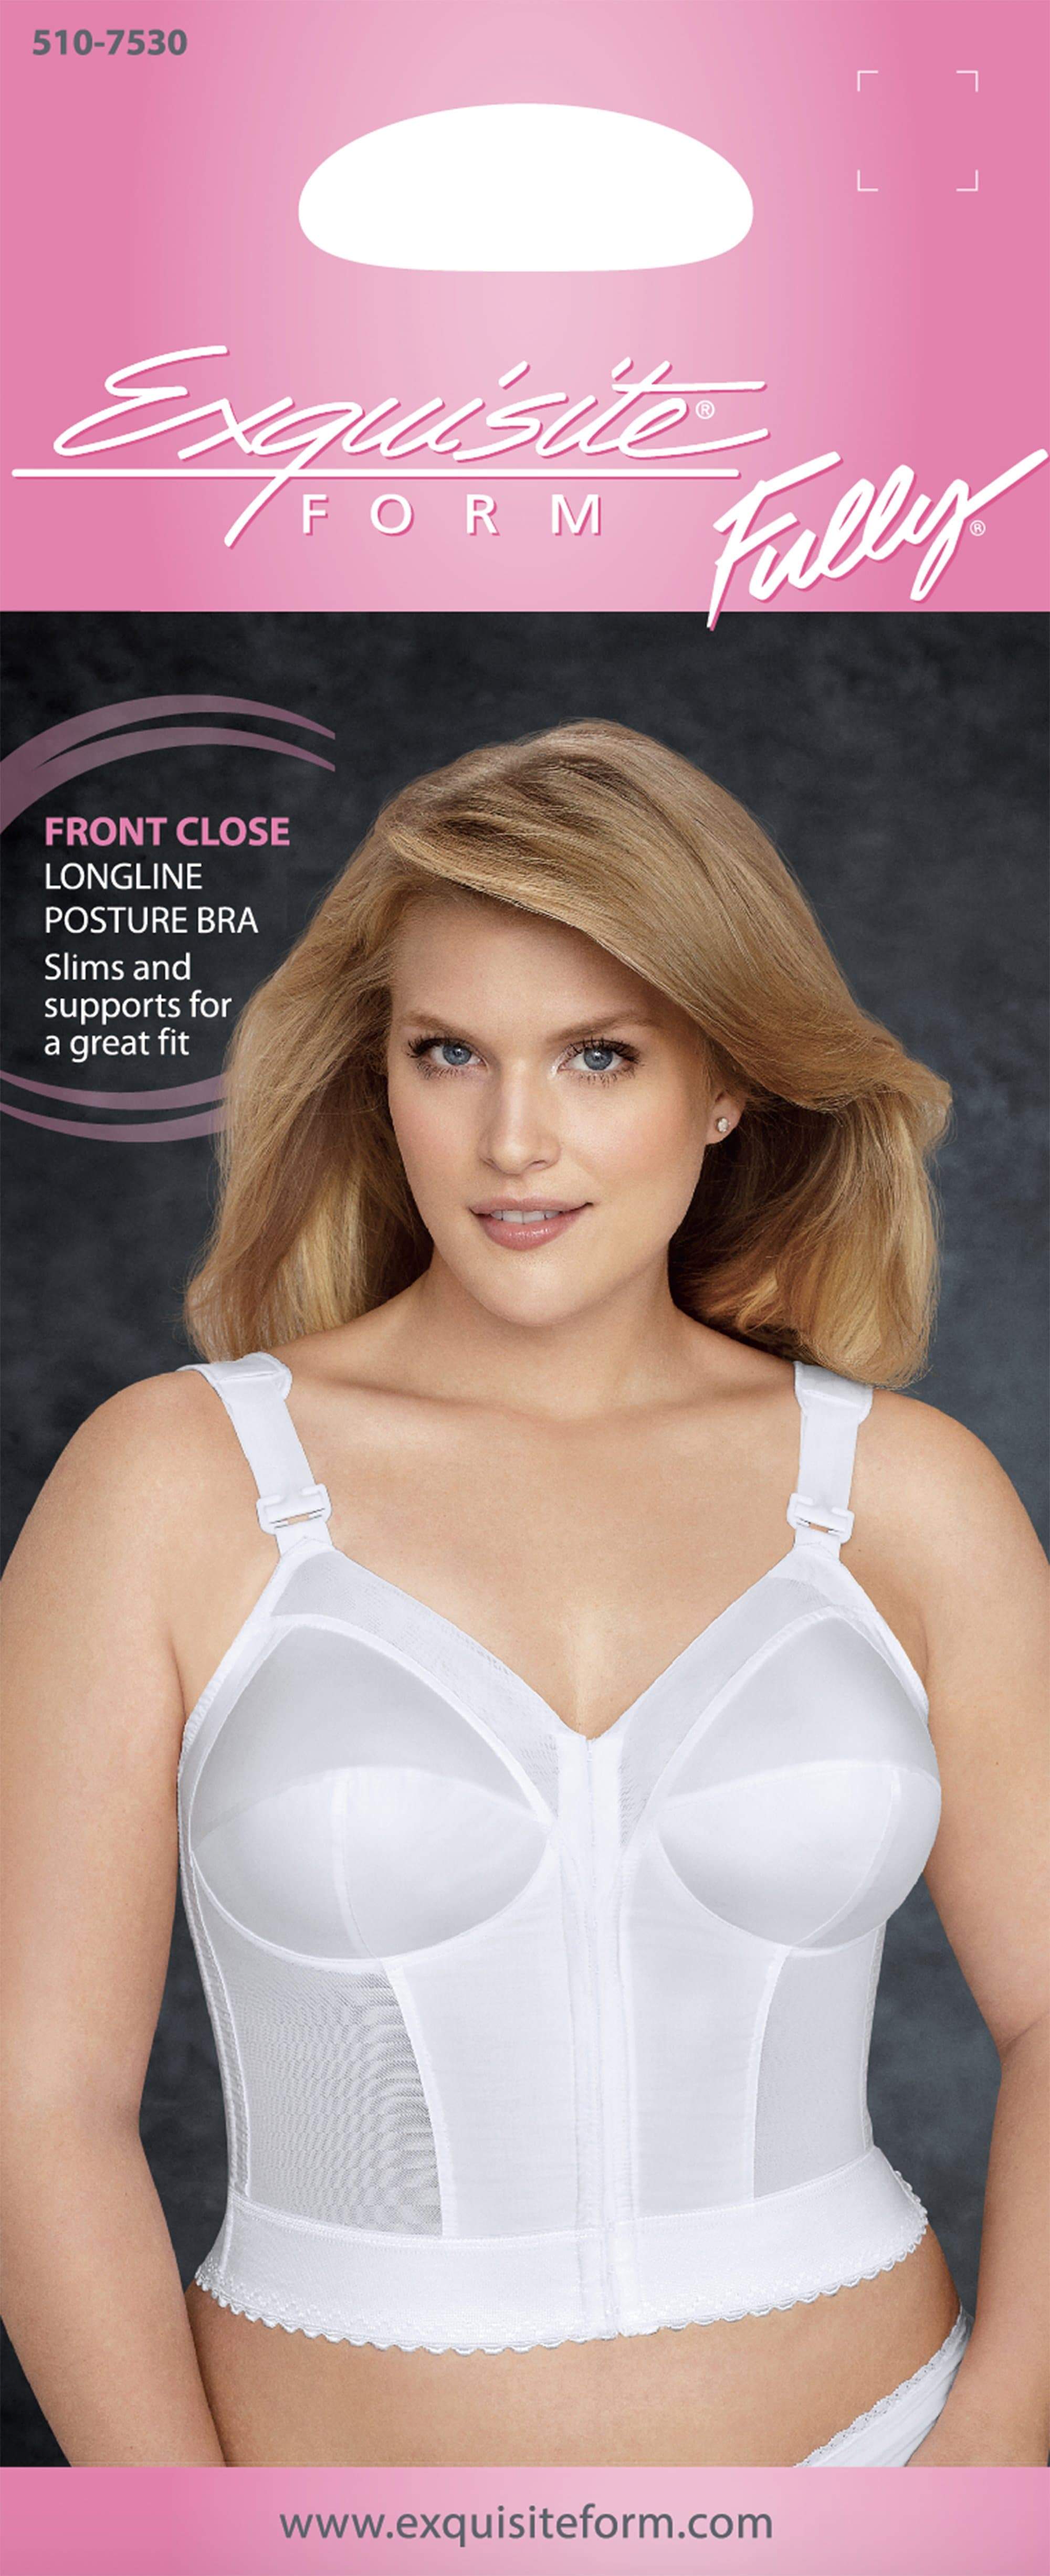 Exquisite Form Fully Curvy - - Bra Close Bras Posture White Longline Front